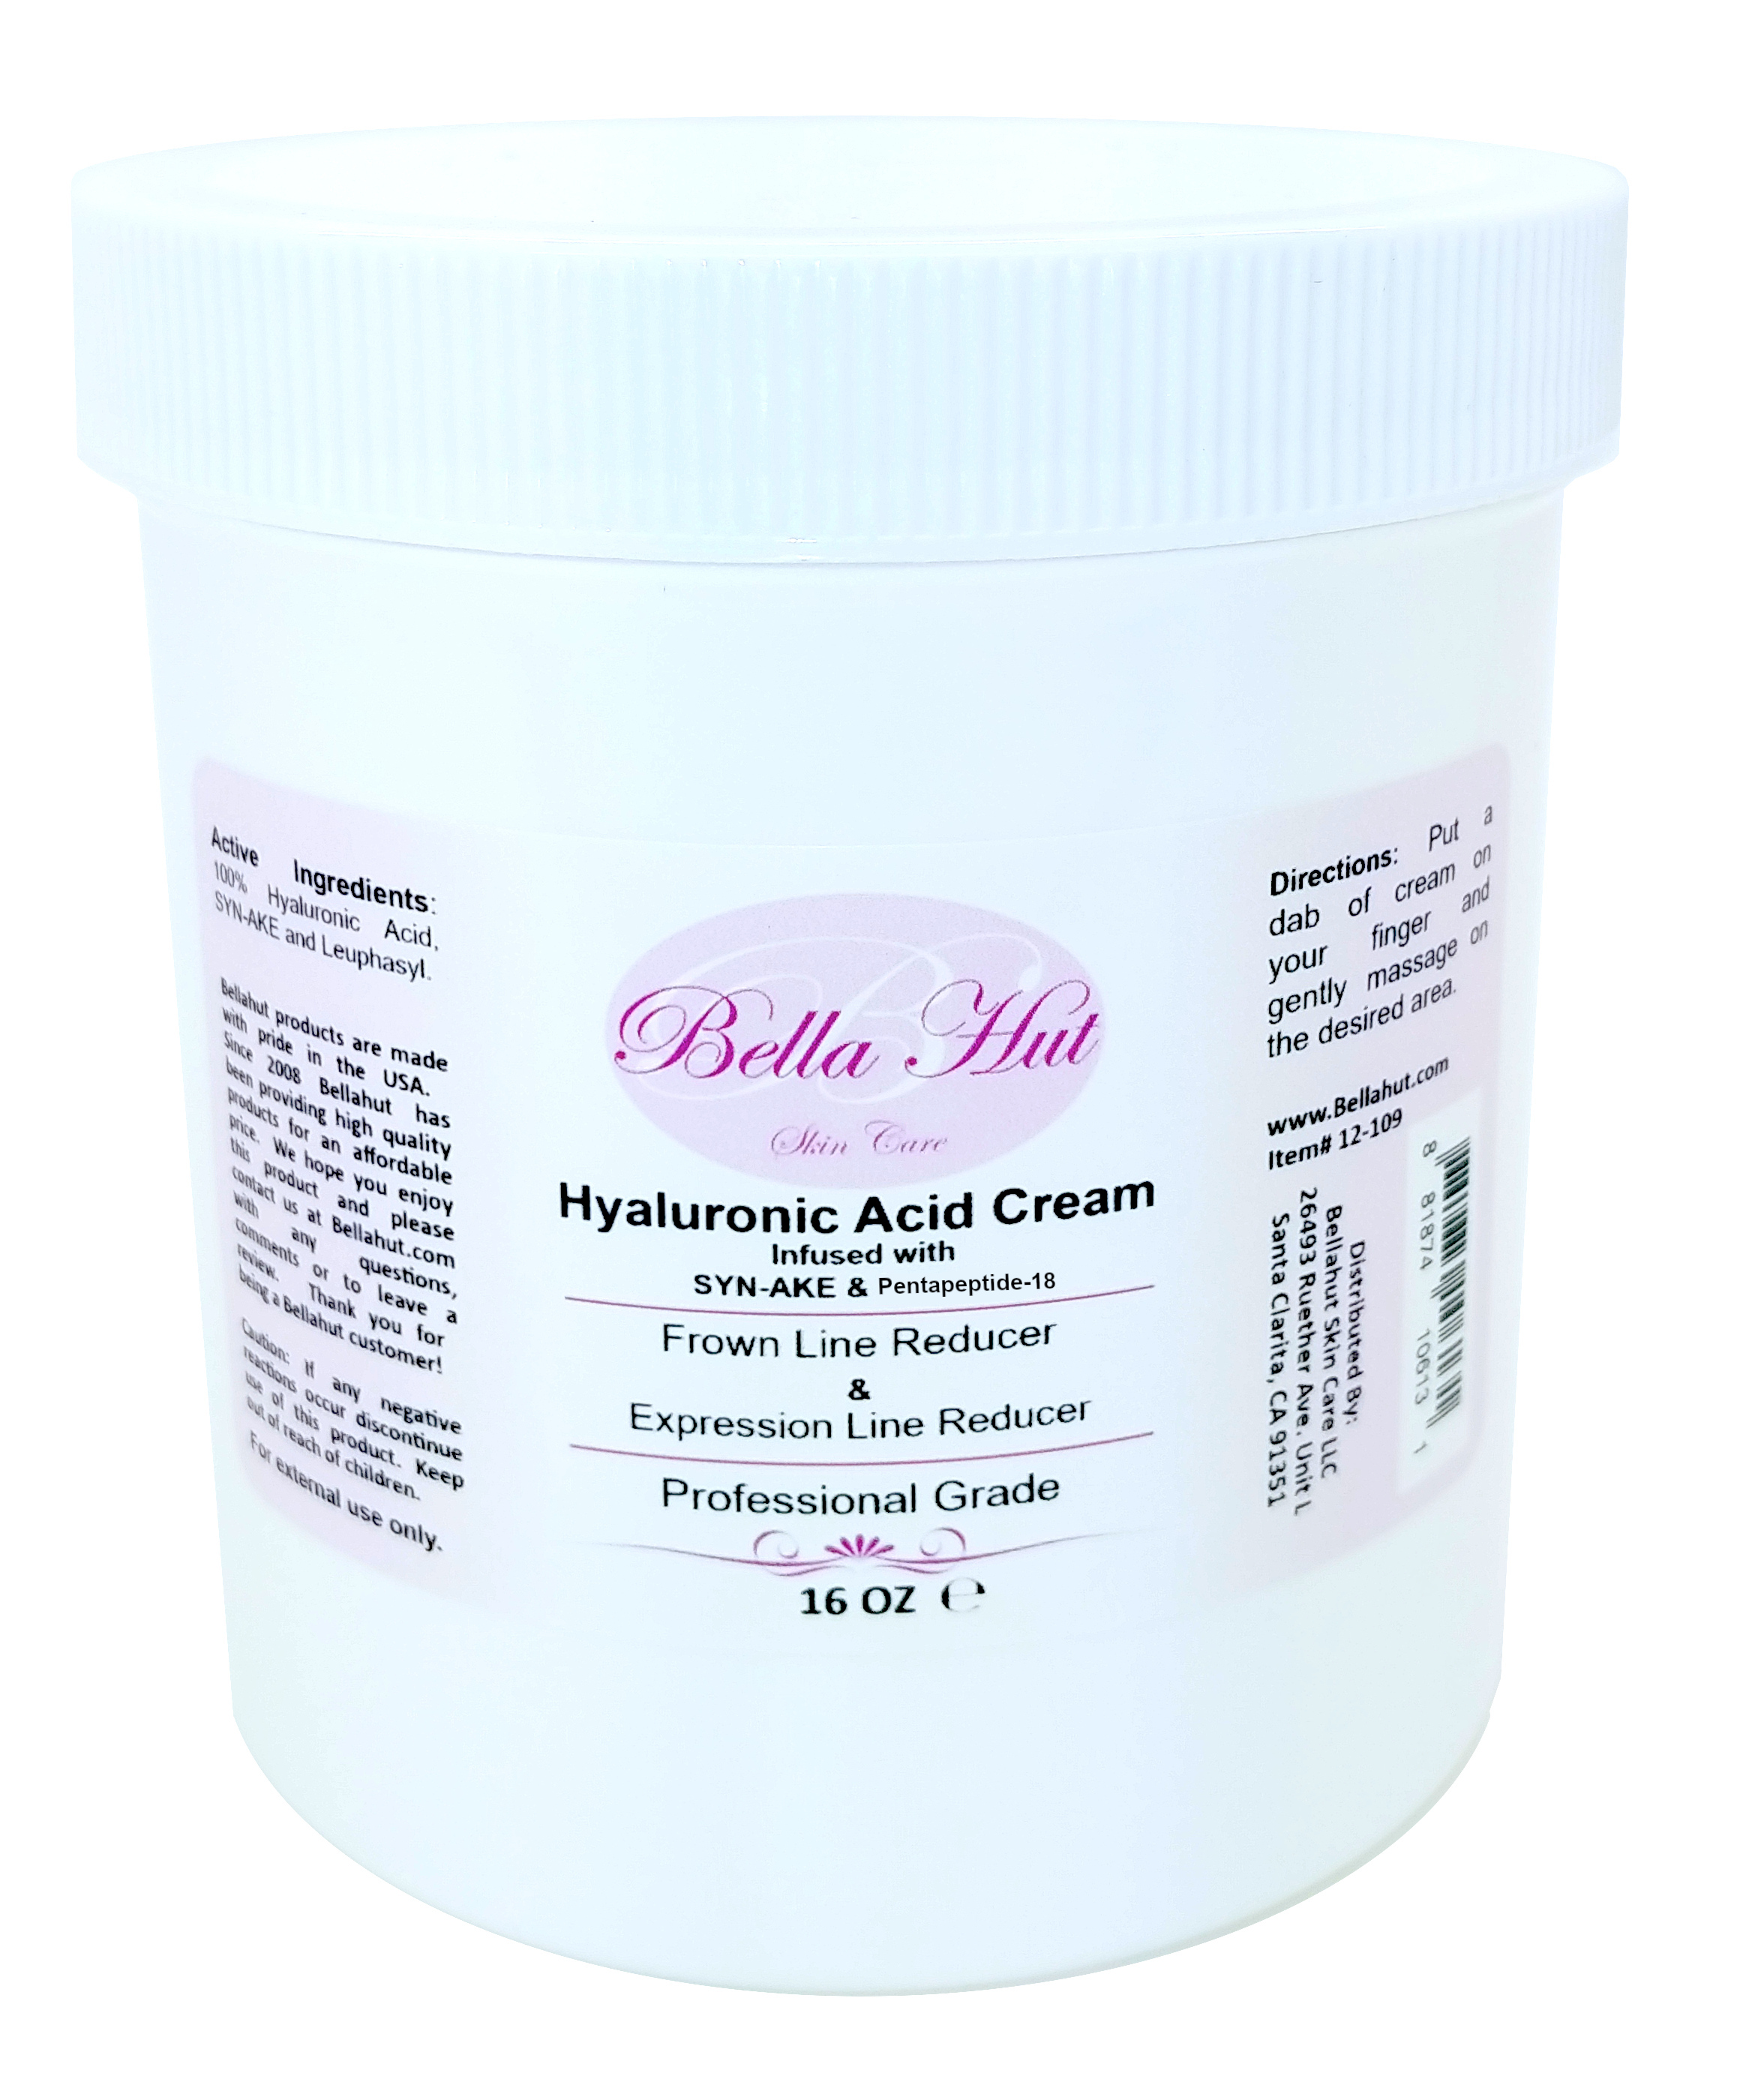 100% Hyaluronic Acid Cream with Syn-Ake and Pentapeptide-18